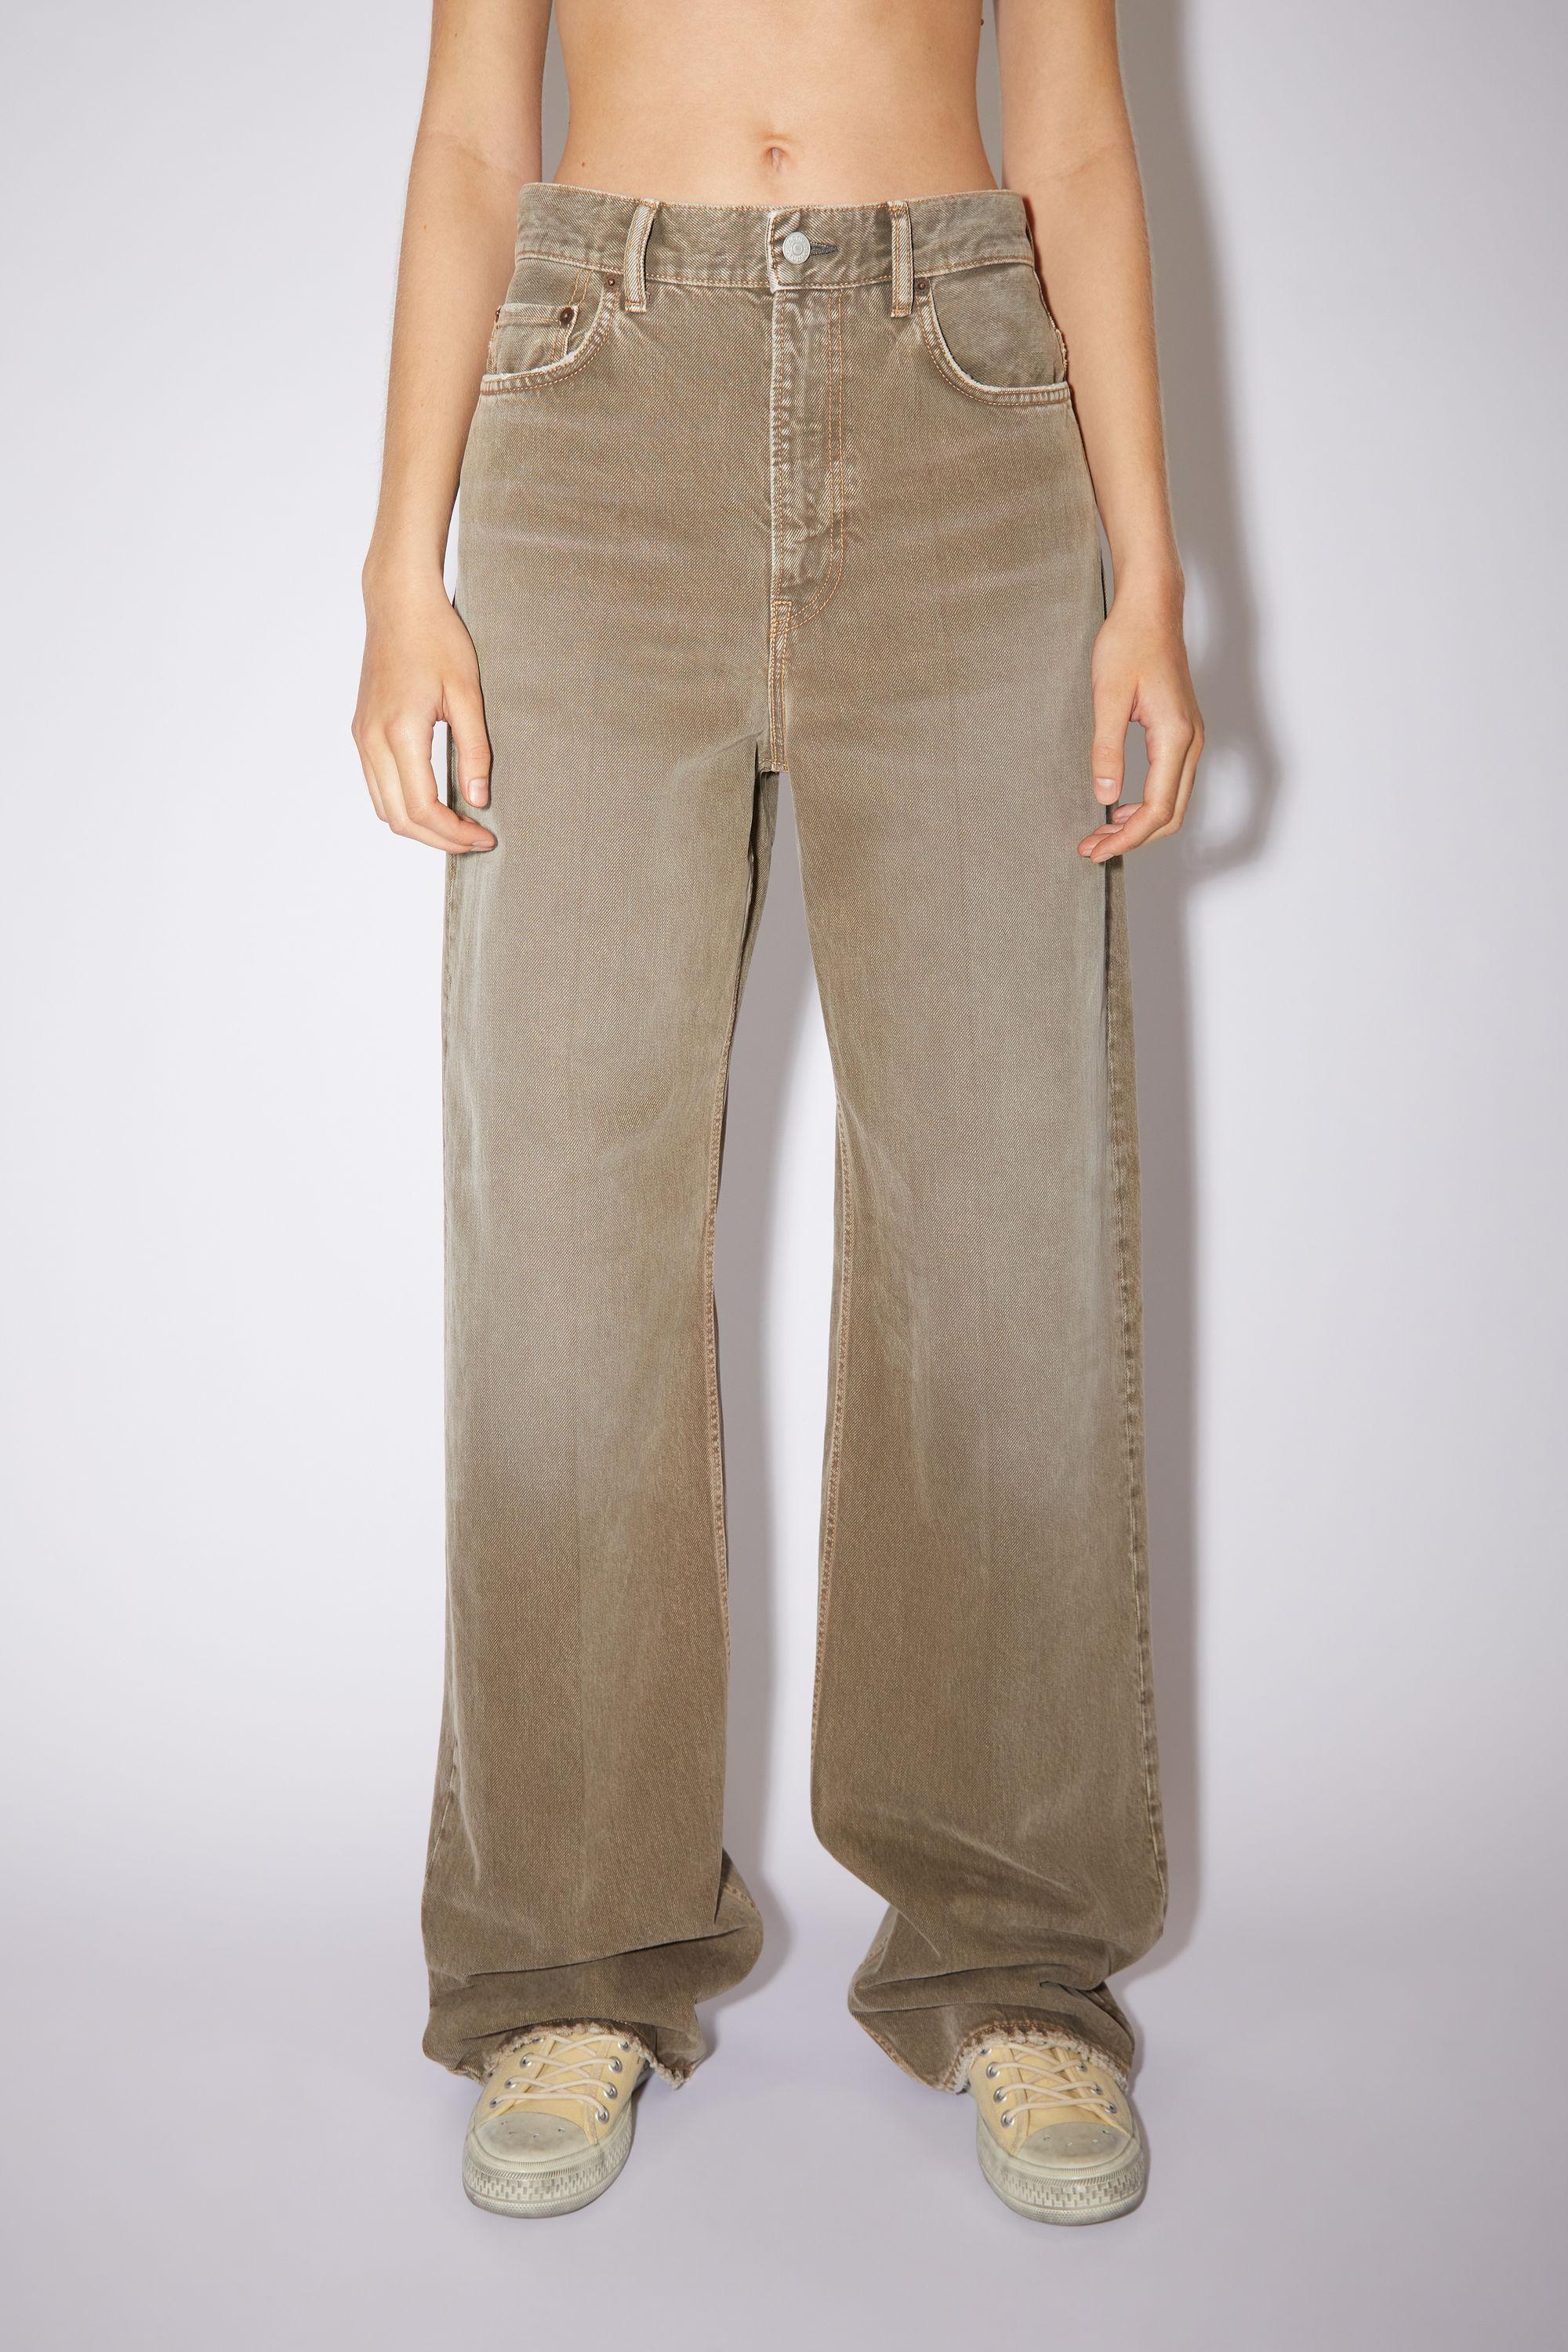 Acne Studios 2022 Dust Devil Loose Bootcut Jeans in Natural | Lyst